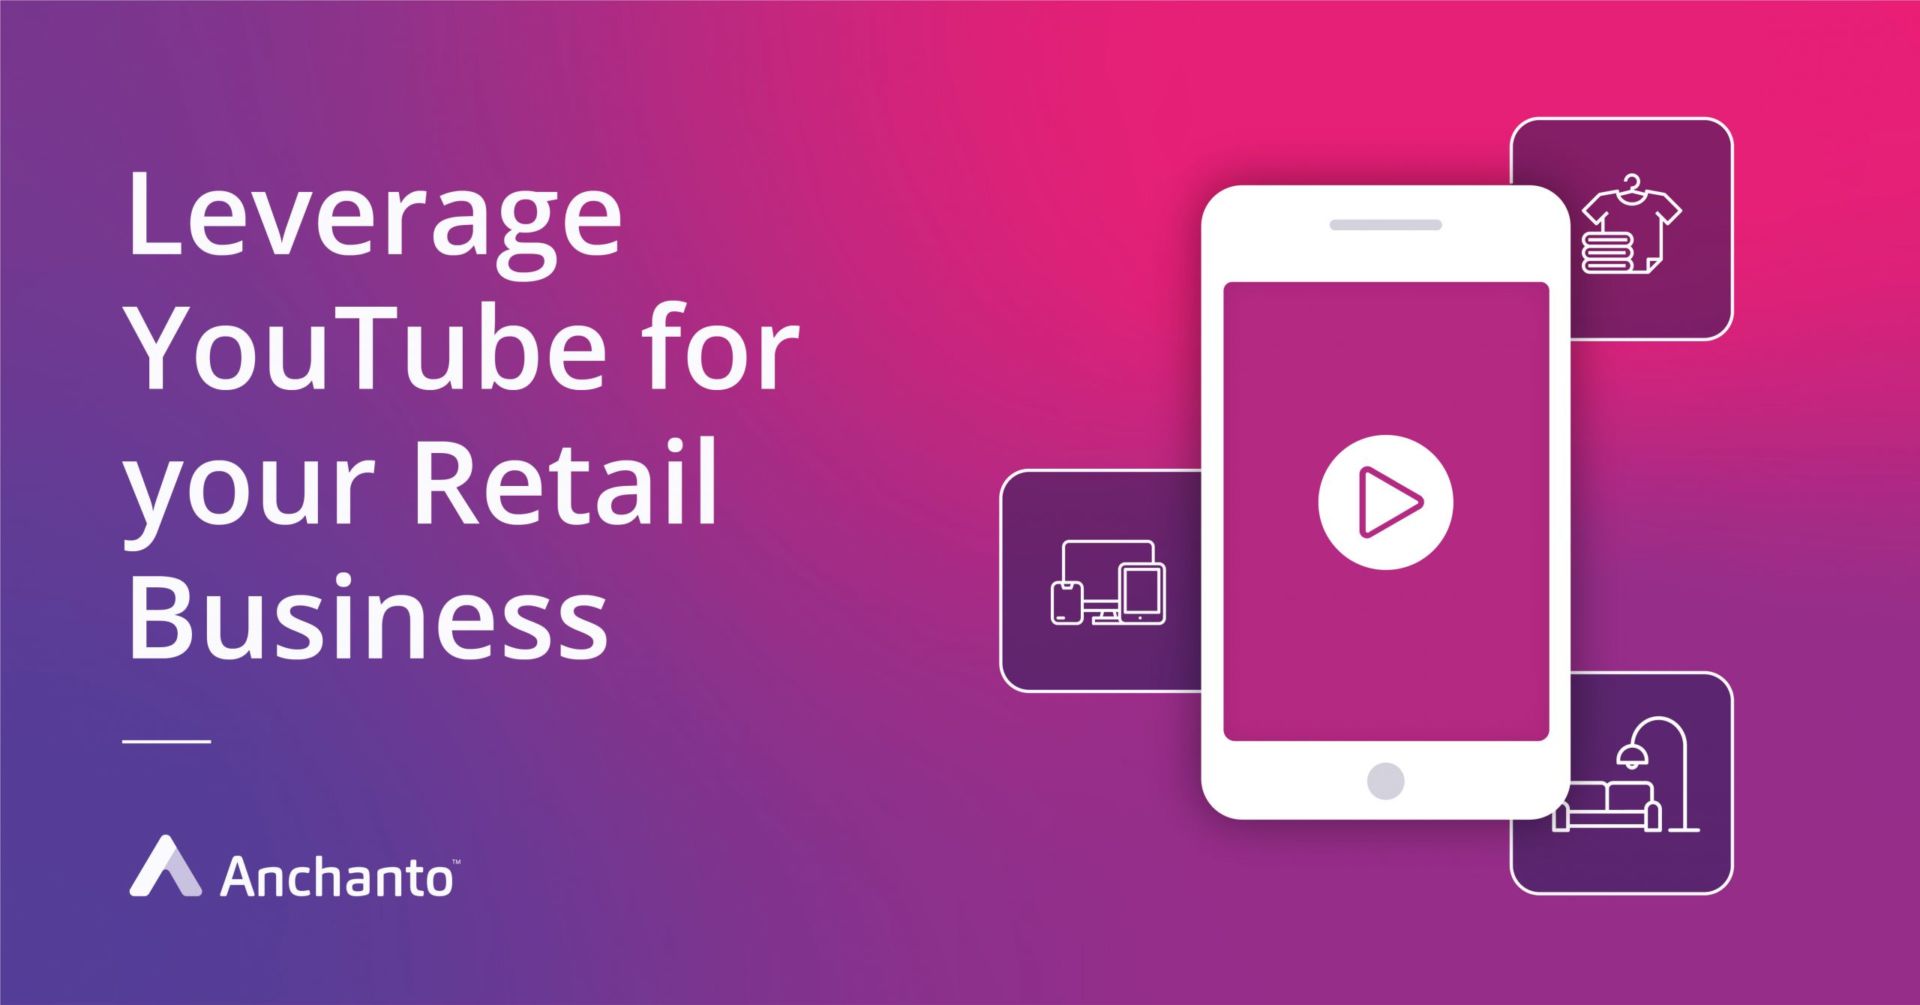 How to Leverage YouTube for Retail Businesses